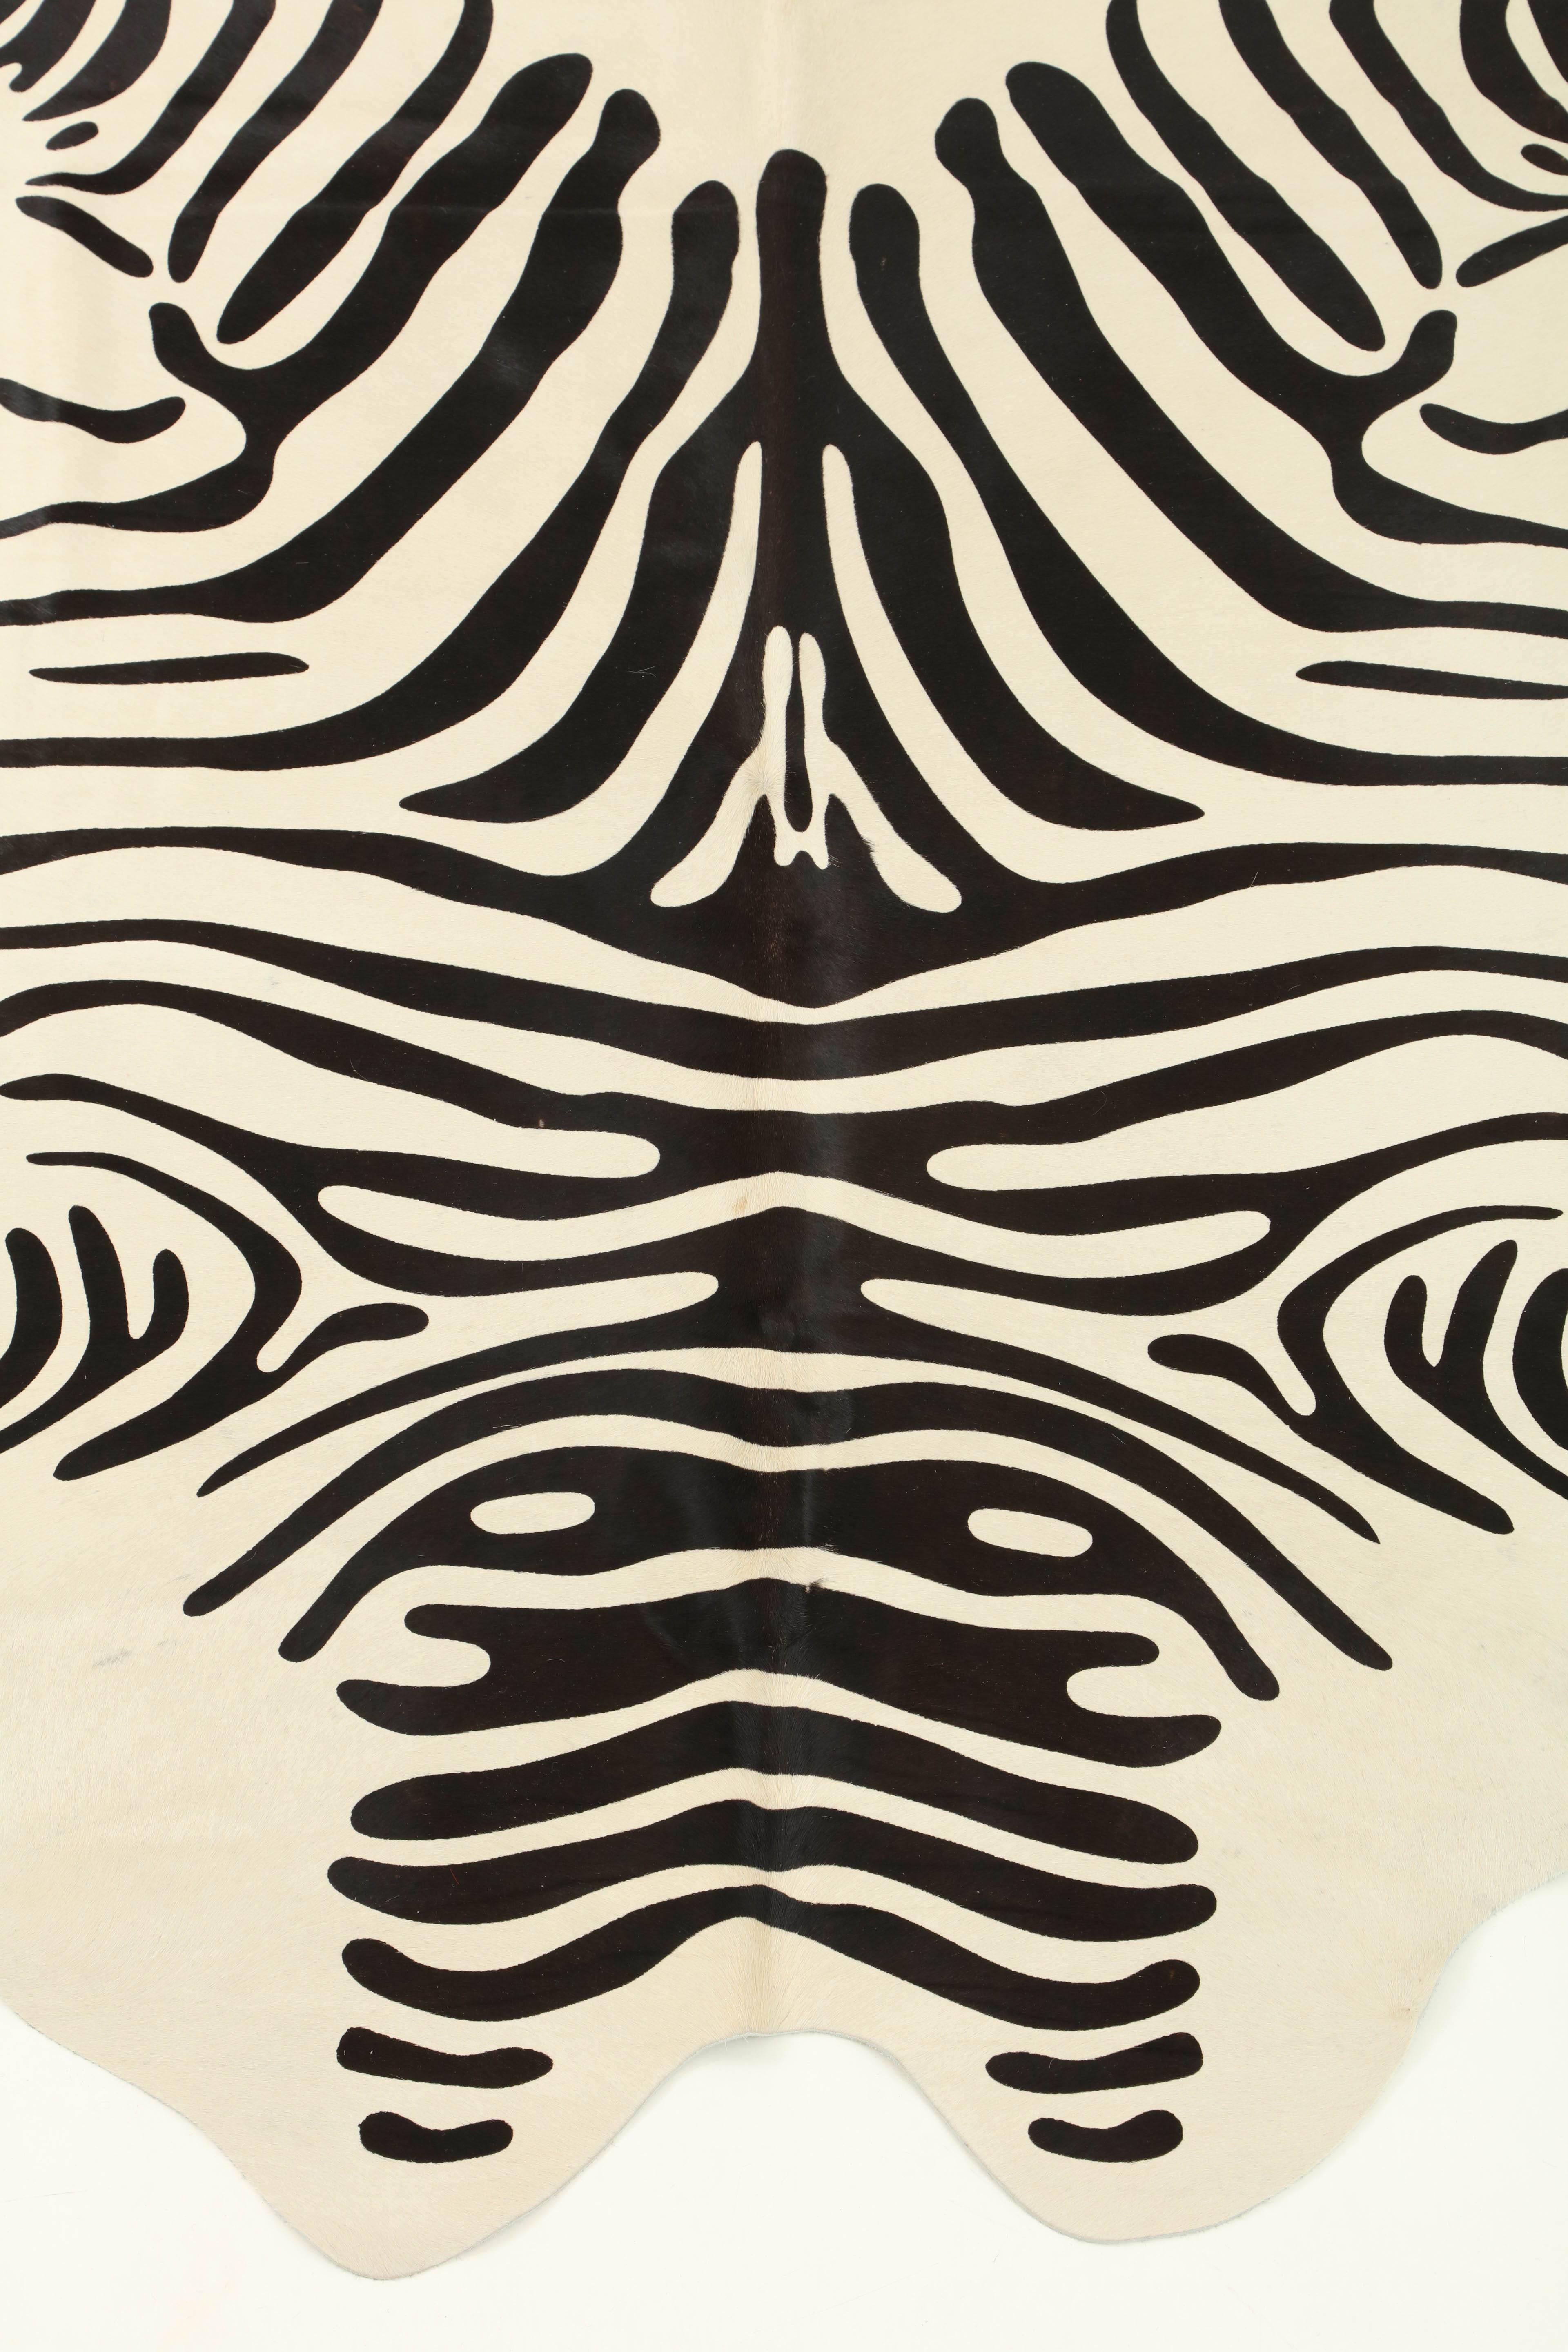 This stenciled zebra print Brazilian cowhide rug is made with 100% natural materials. Their tanneries are ISO-9001 certified for quality and ISO 14001 certified for low environmental impact which is what gives them their gold star rating from